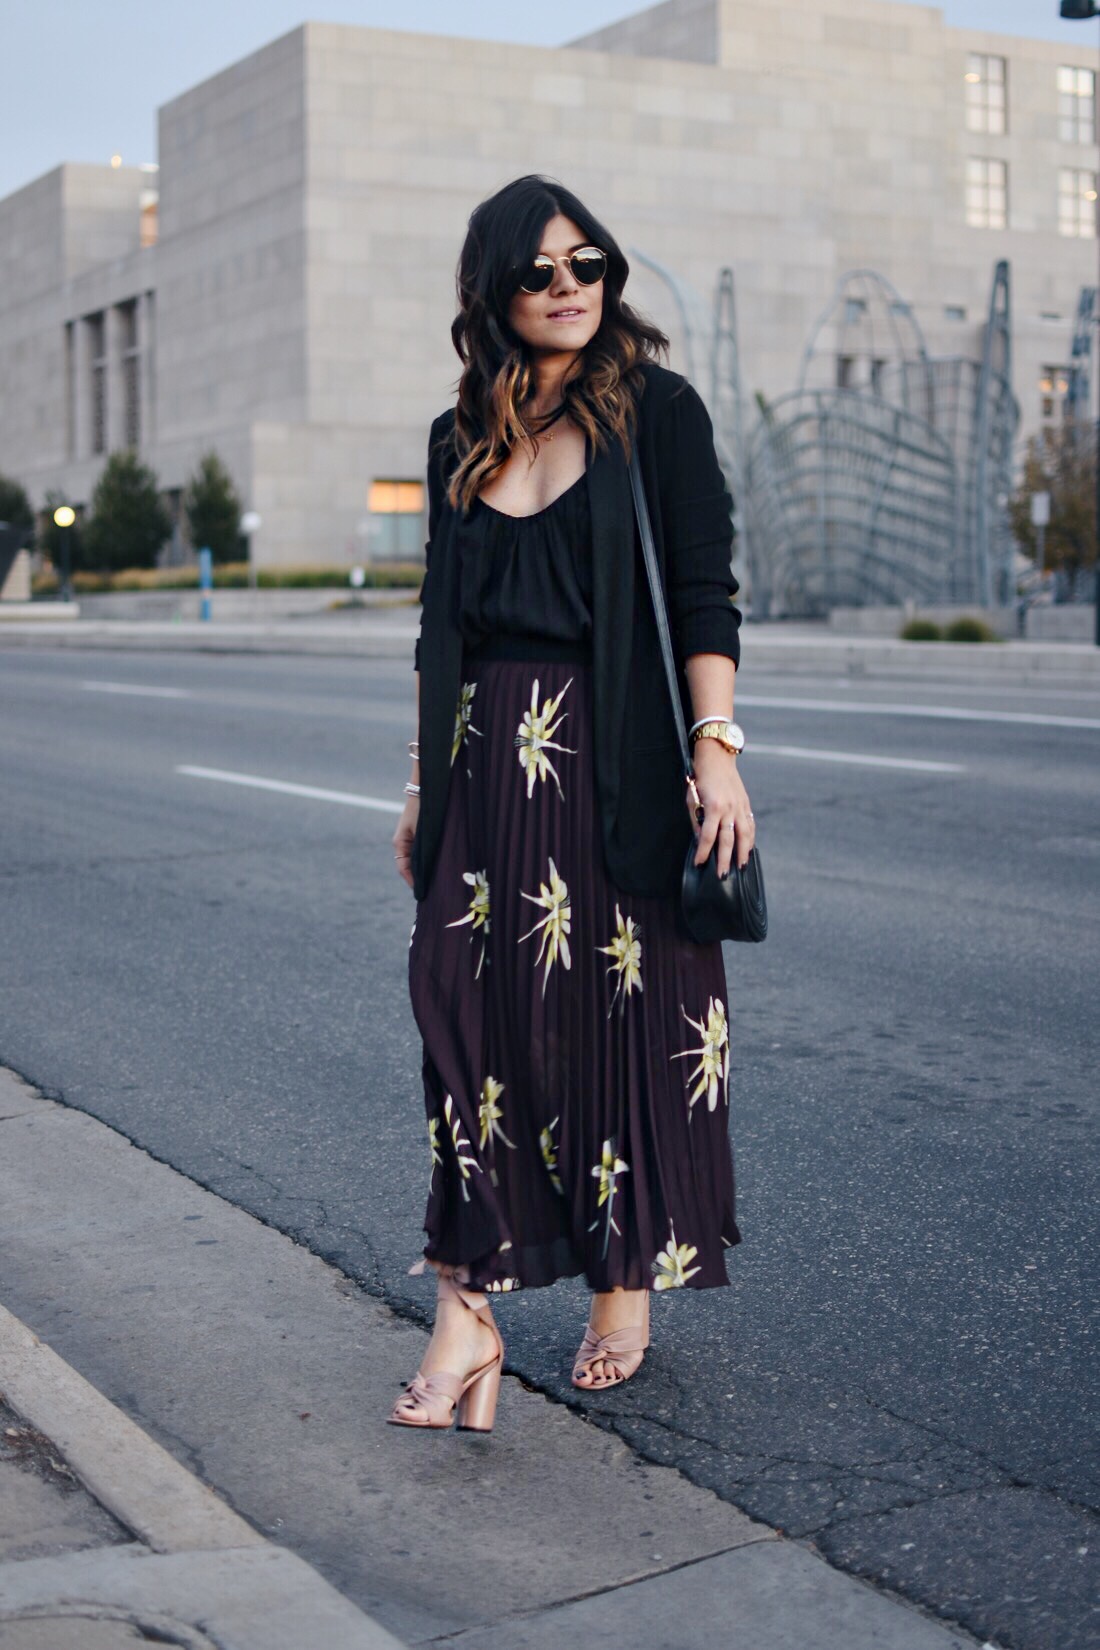 Carolina Hellal of Chic Talk wearing an H&M pleated burgundy skirt, Black blazer , Rayban rounded sunglasses and Topshop blush sandals